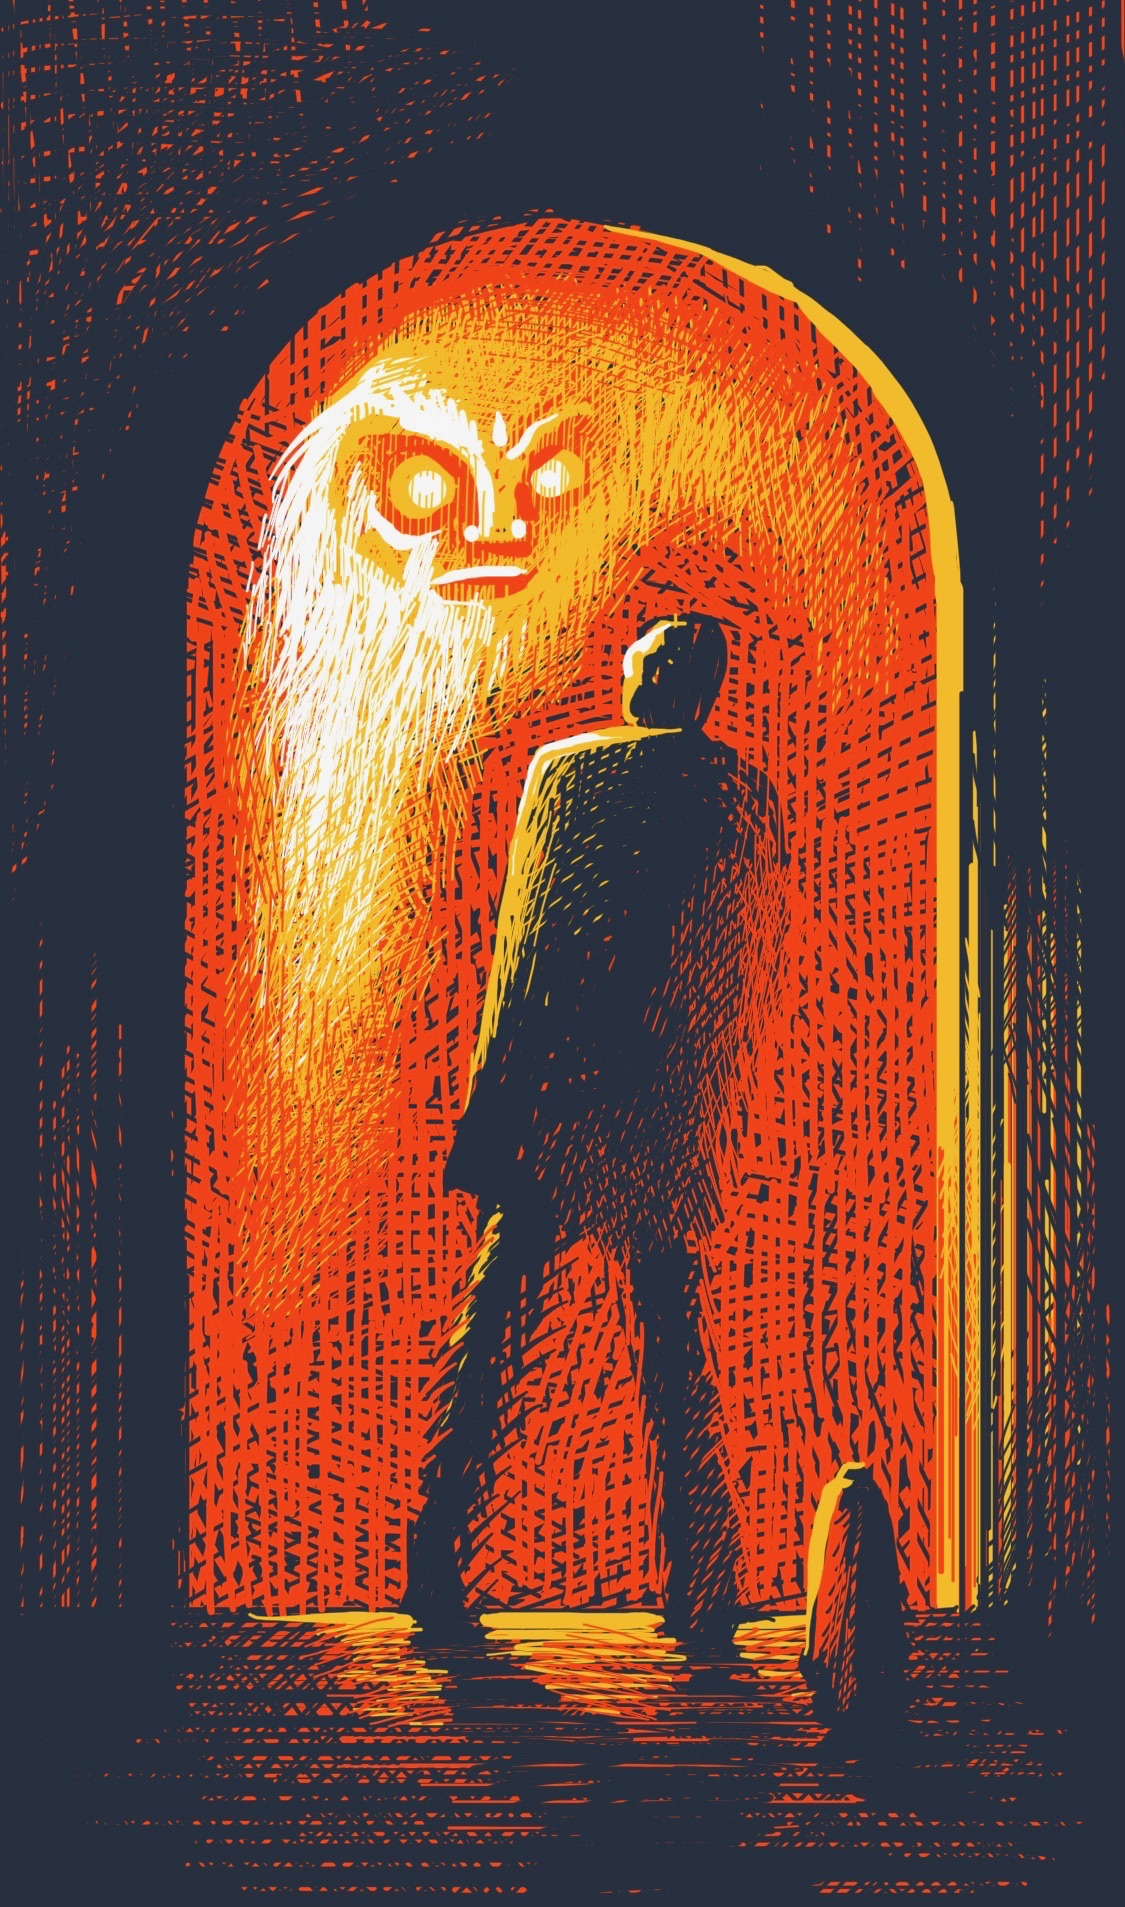 A person stands in a doorway, beyond which is a fiery red world with a glaring glowing face looking back